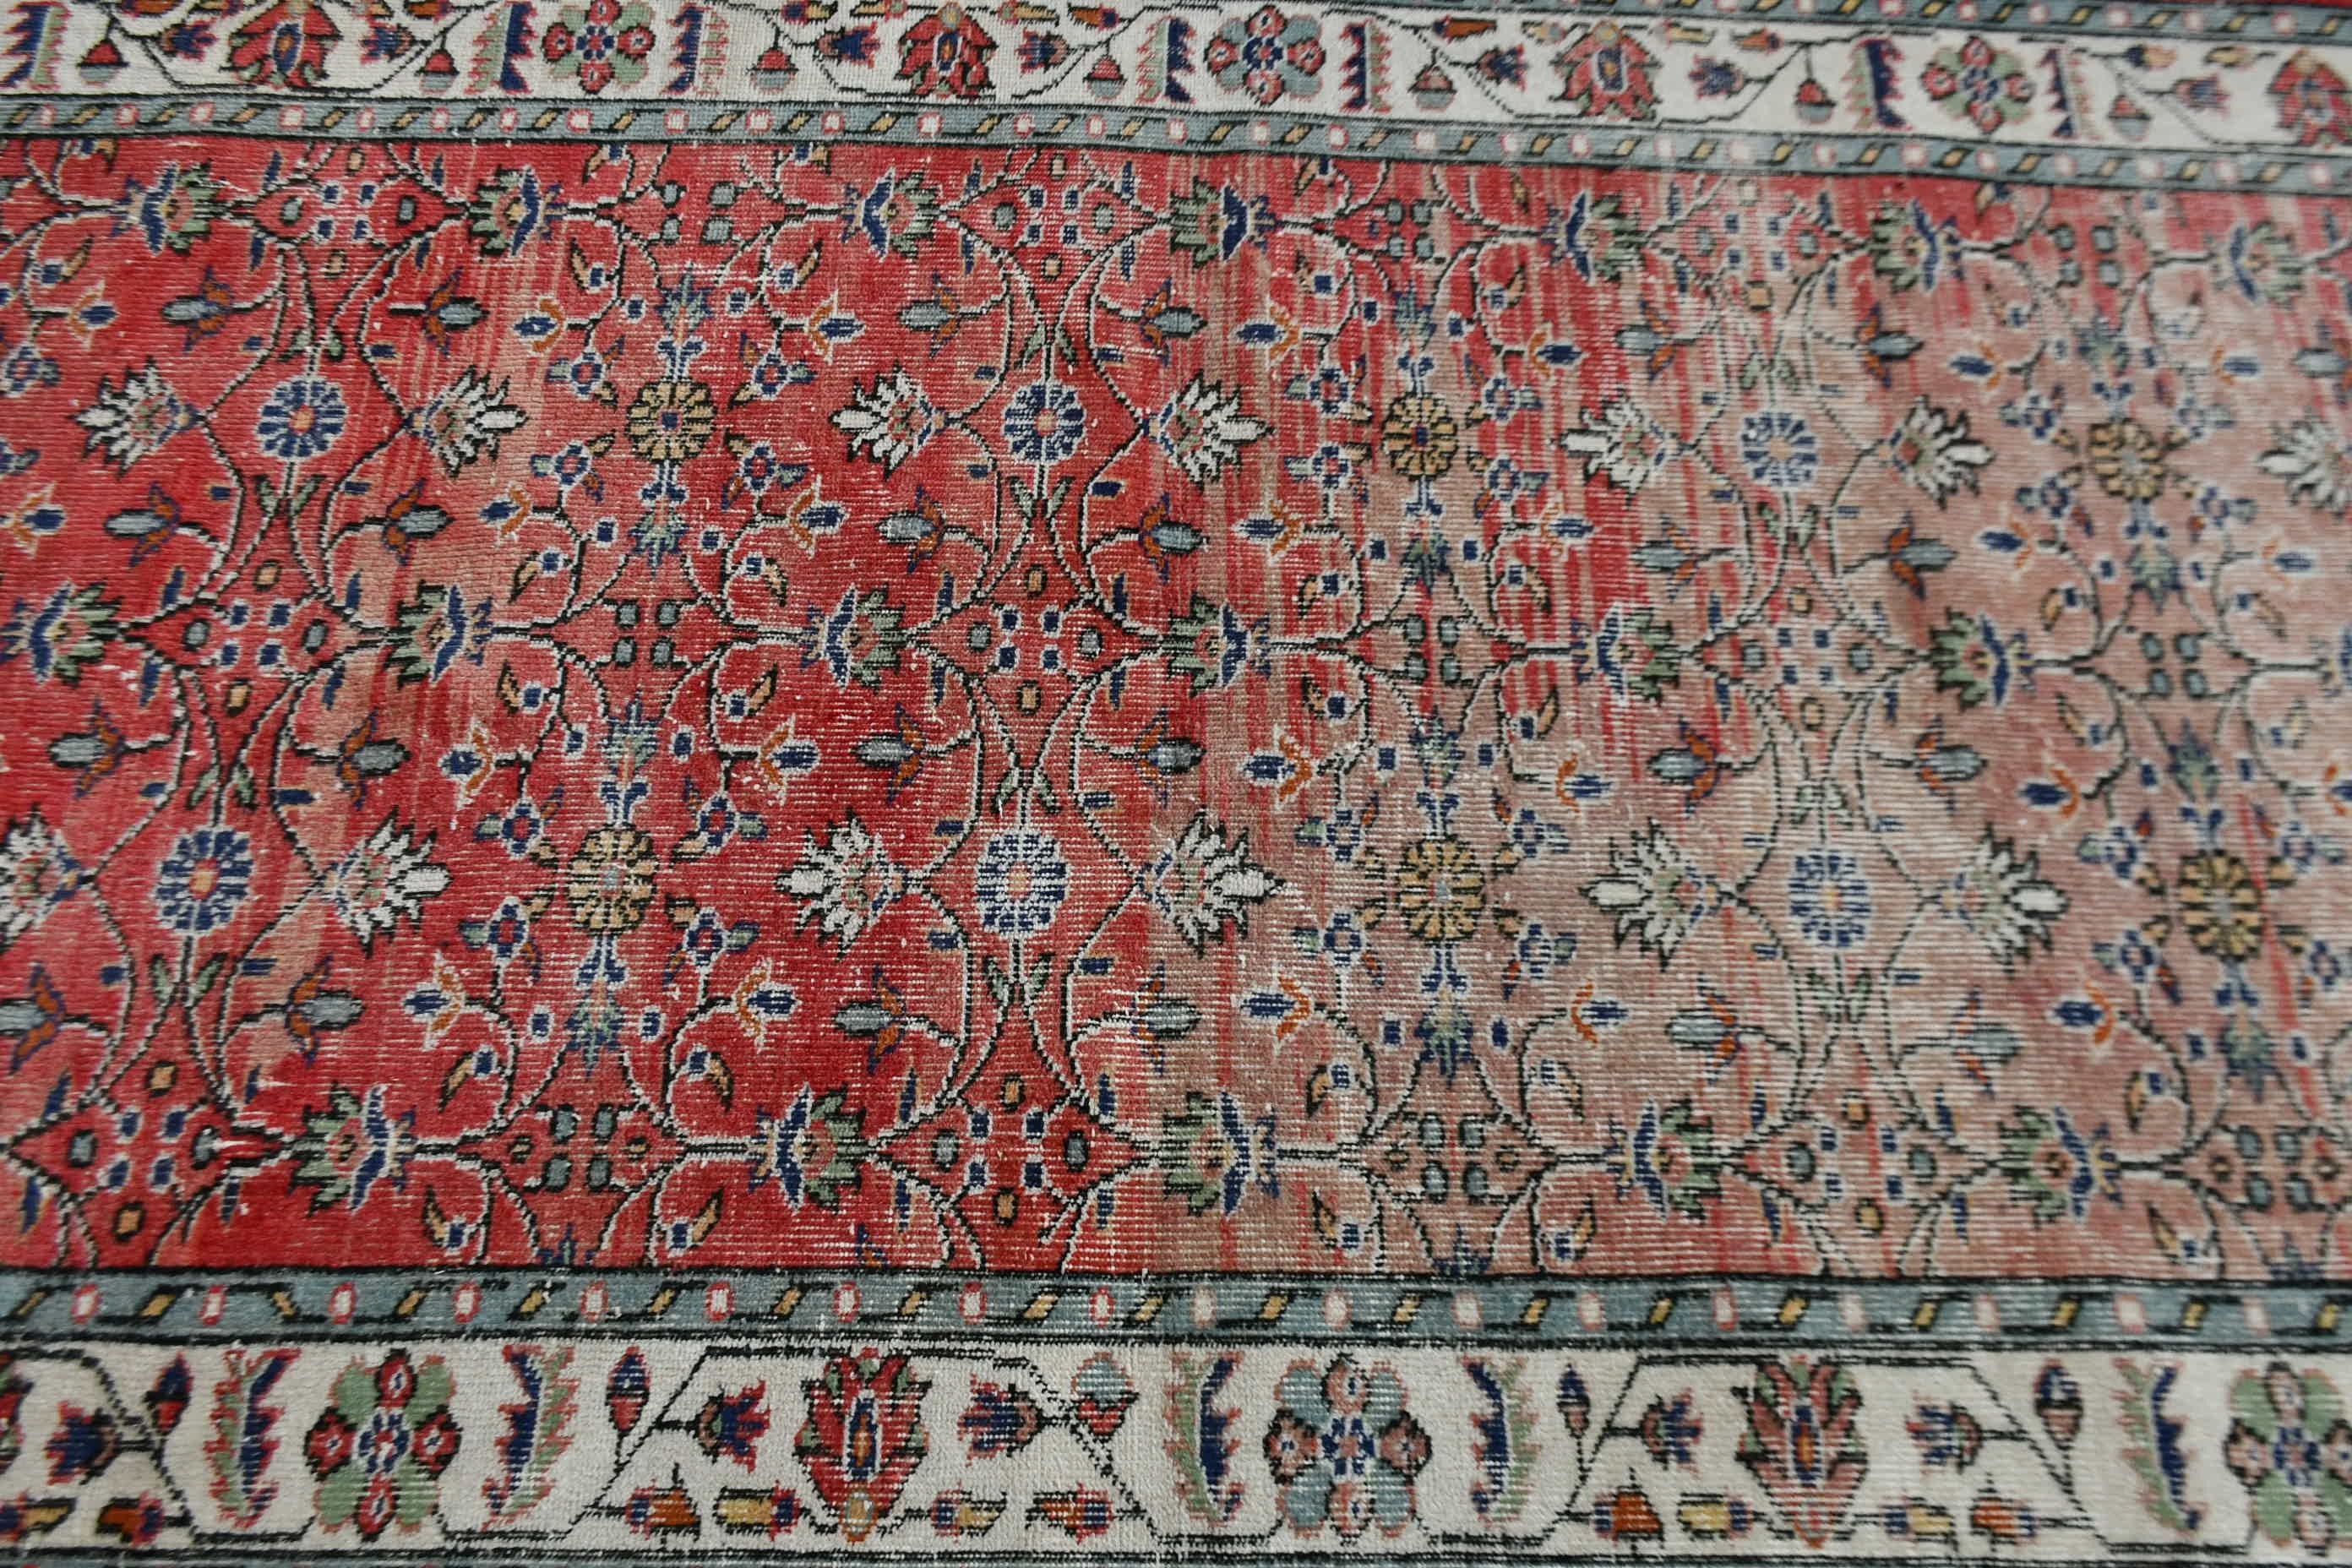 Bedroom Rugs, Red Antique Rugs, Rugs for Kitchen, Vintage Rugs, Kitchen Rug, 4.2x6.7 ft Area Rug, Turkish Rug, Nursery Rugs